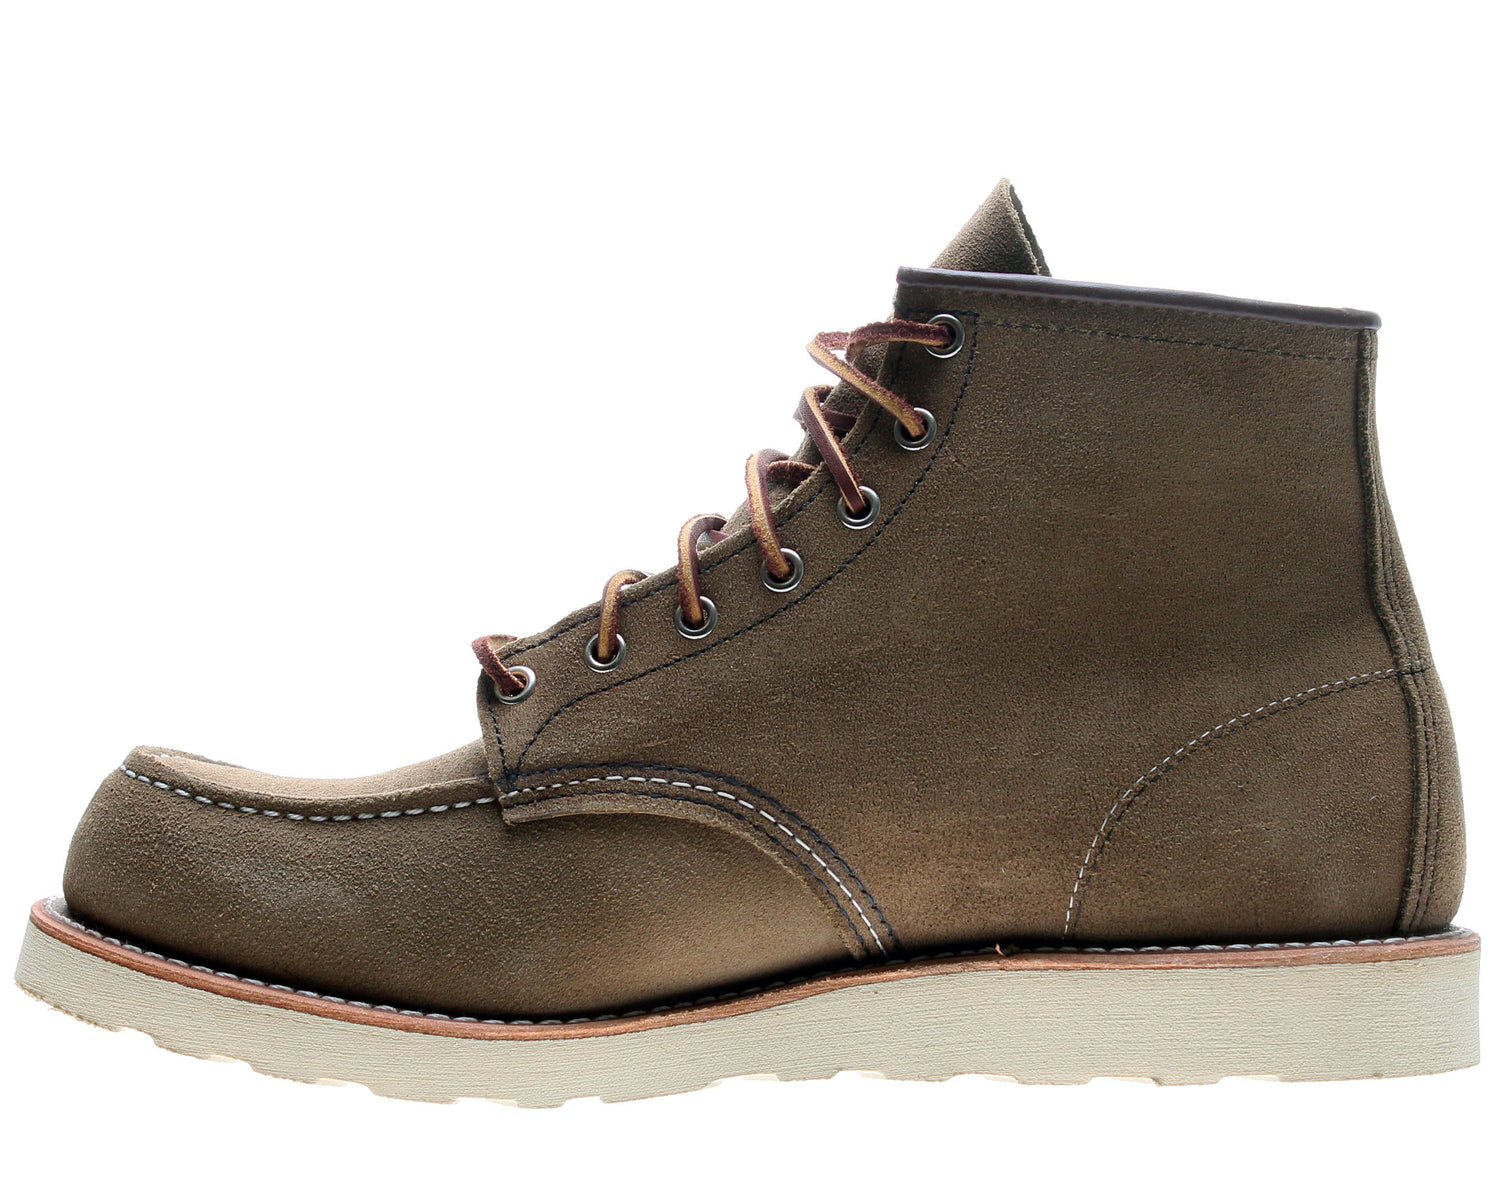 Red Wing Heritage 8881 6-Inch Classic Moc Toe Men's Boots